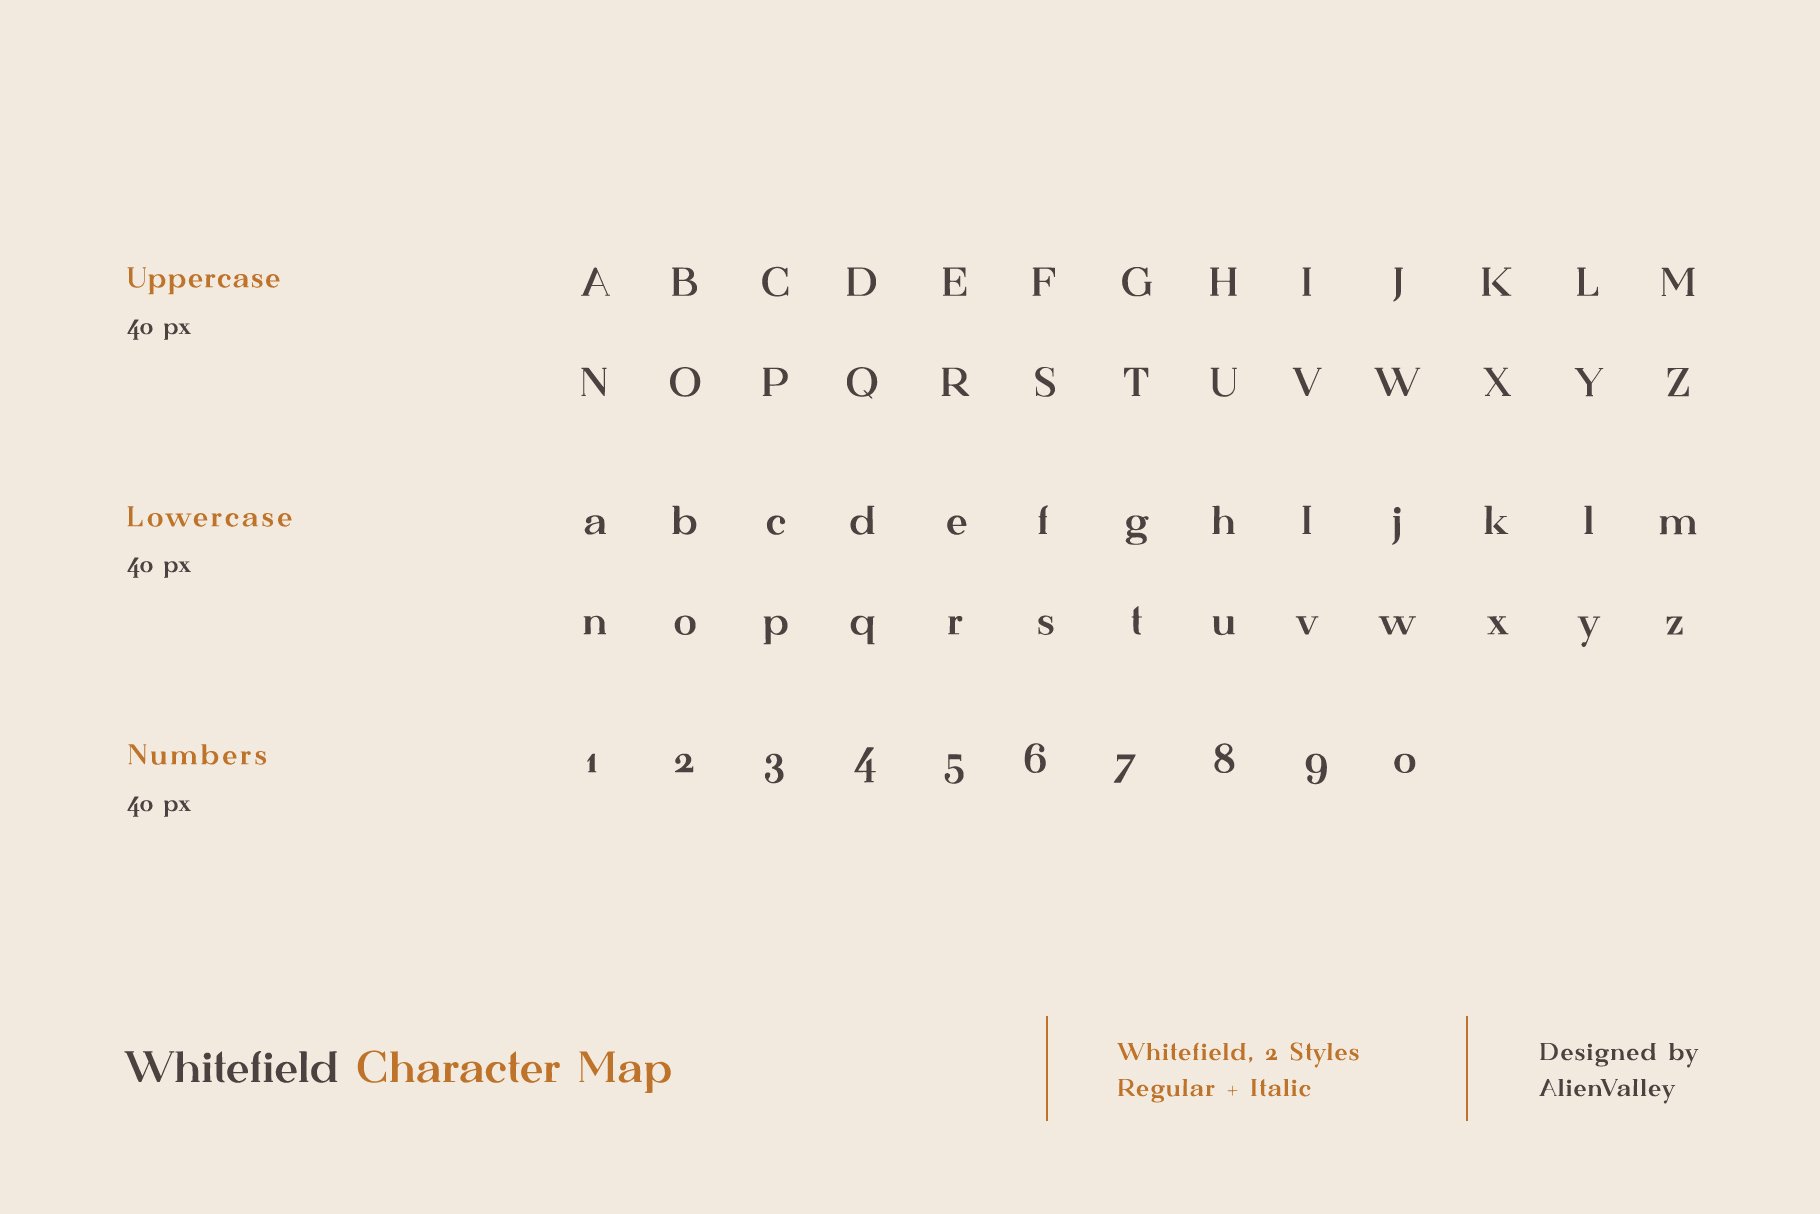 Whitefield - Handcrafted Serif